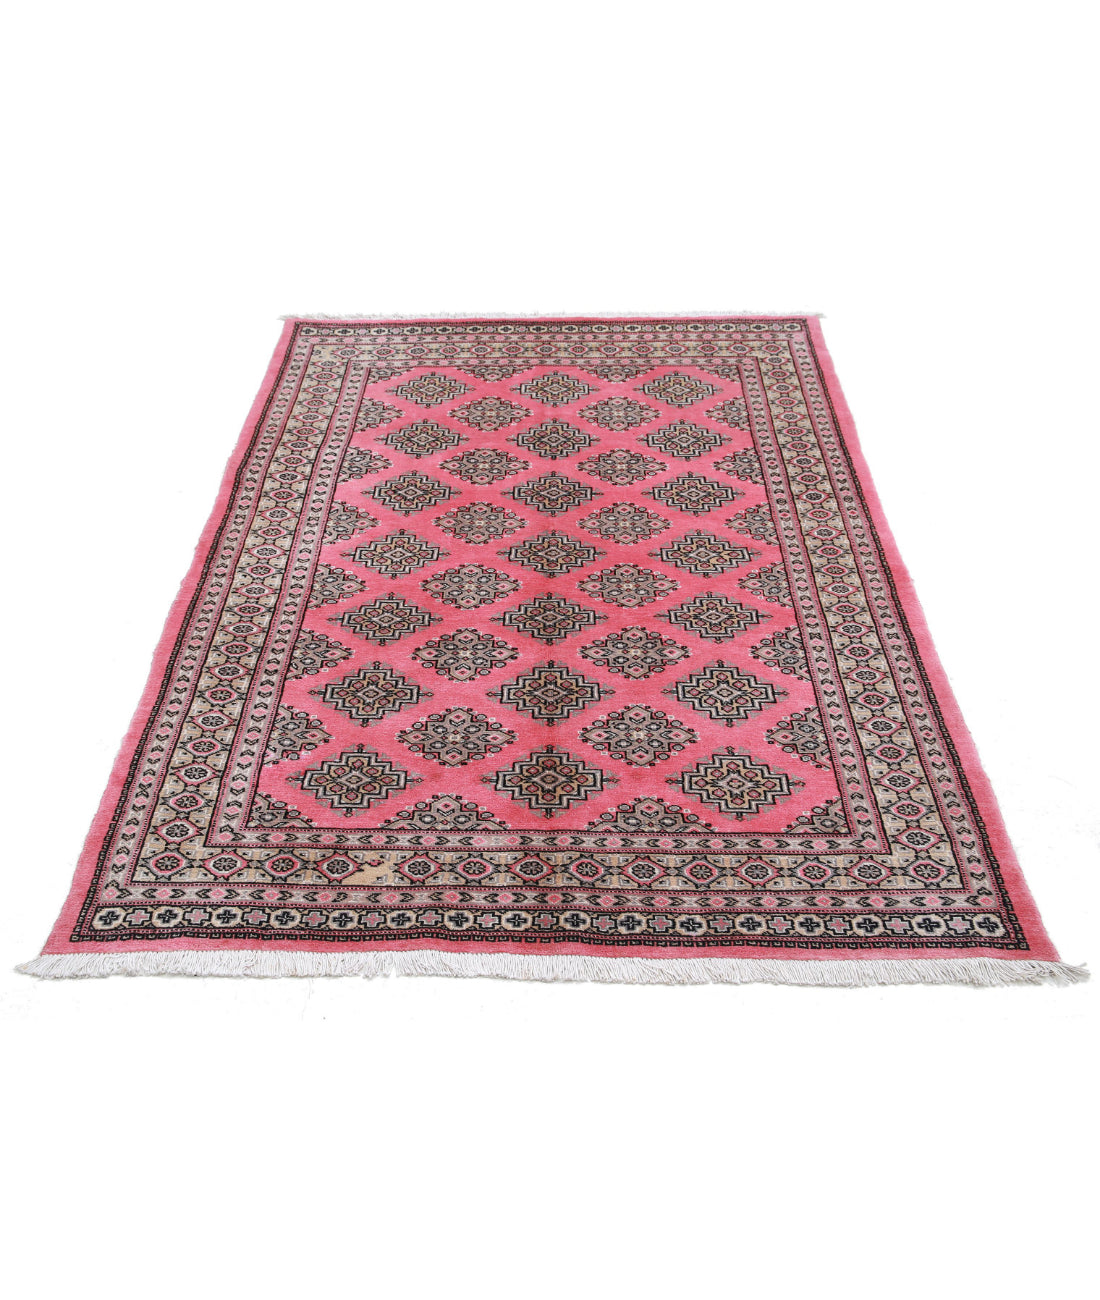 Hand Knotted Tribal Bokhara Wool Rug - 4'7'' x 6'5'' 4'7'' x 6'5'' (138 X 193) / Pink / Gold